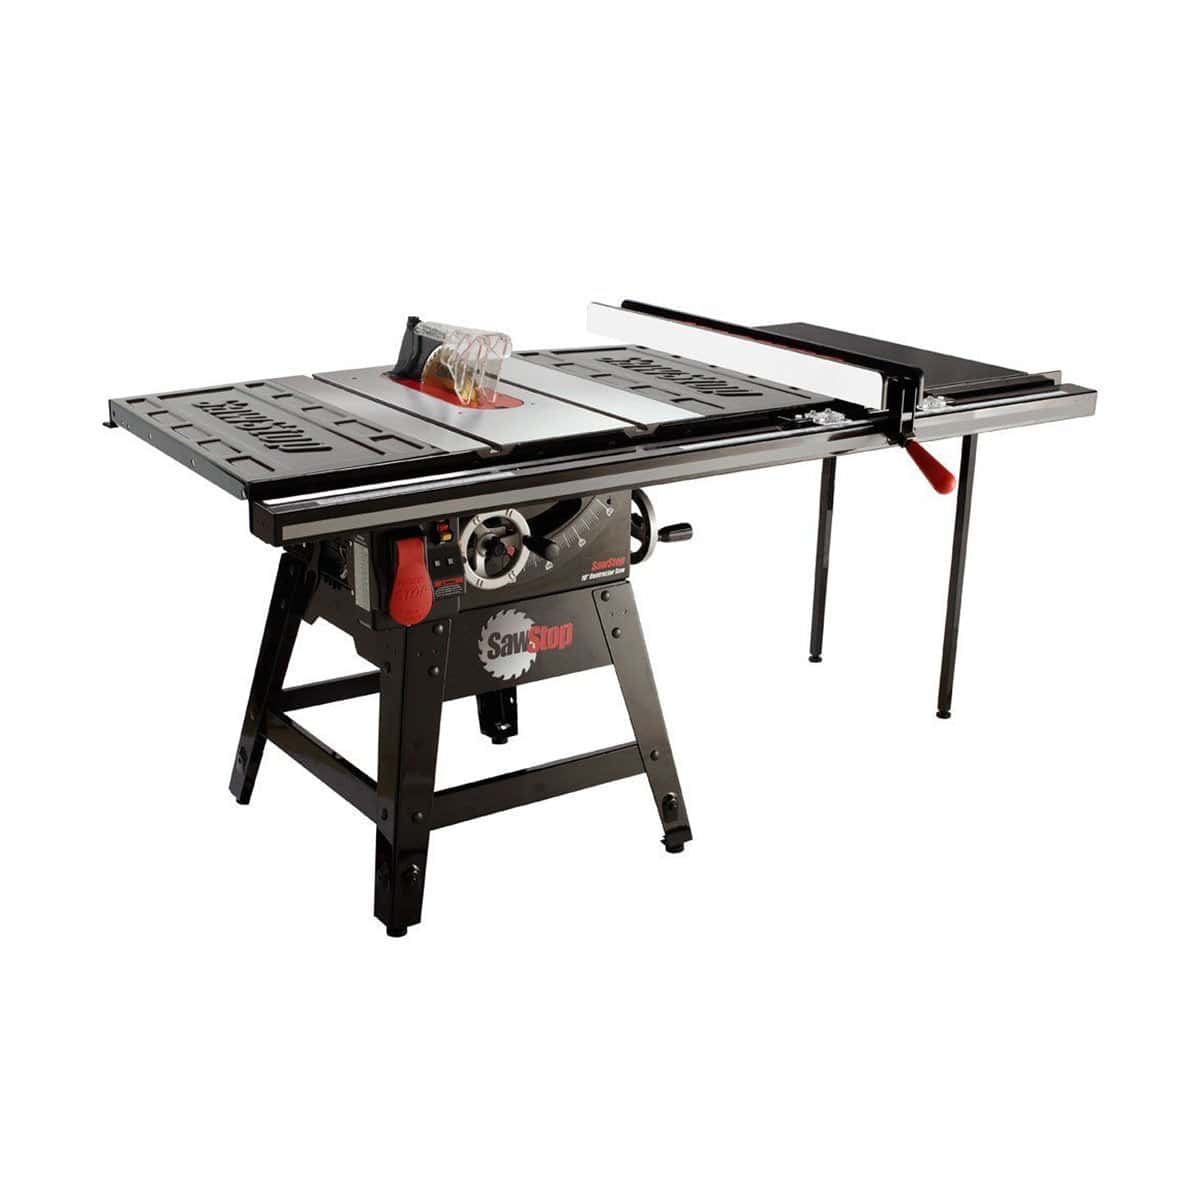 SawStop CNS175-TGP36 Table Saw 10" 1.75HP Contractors Saw 36" Fence